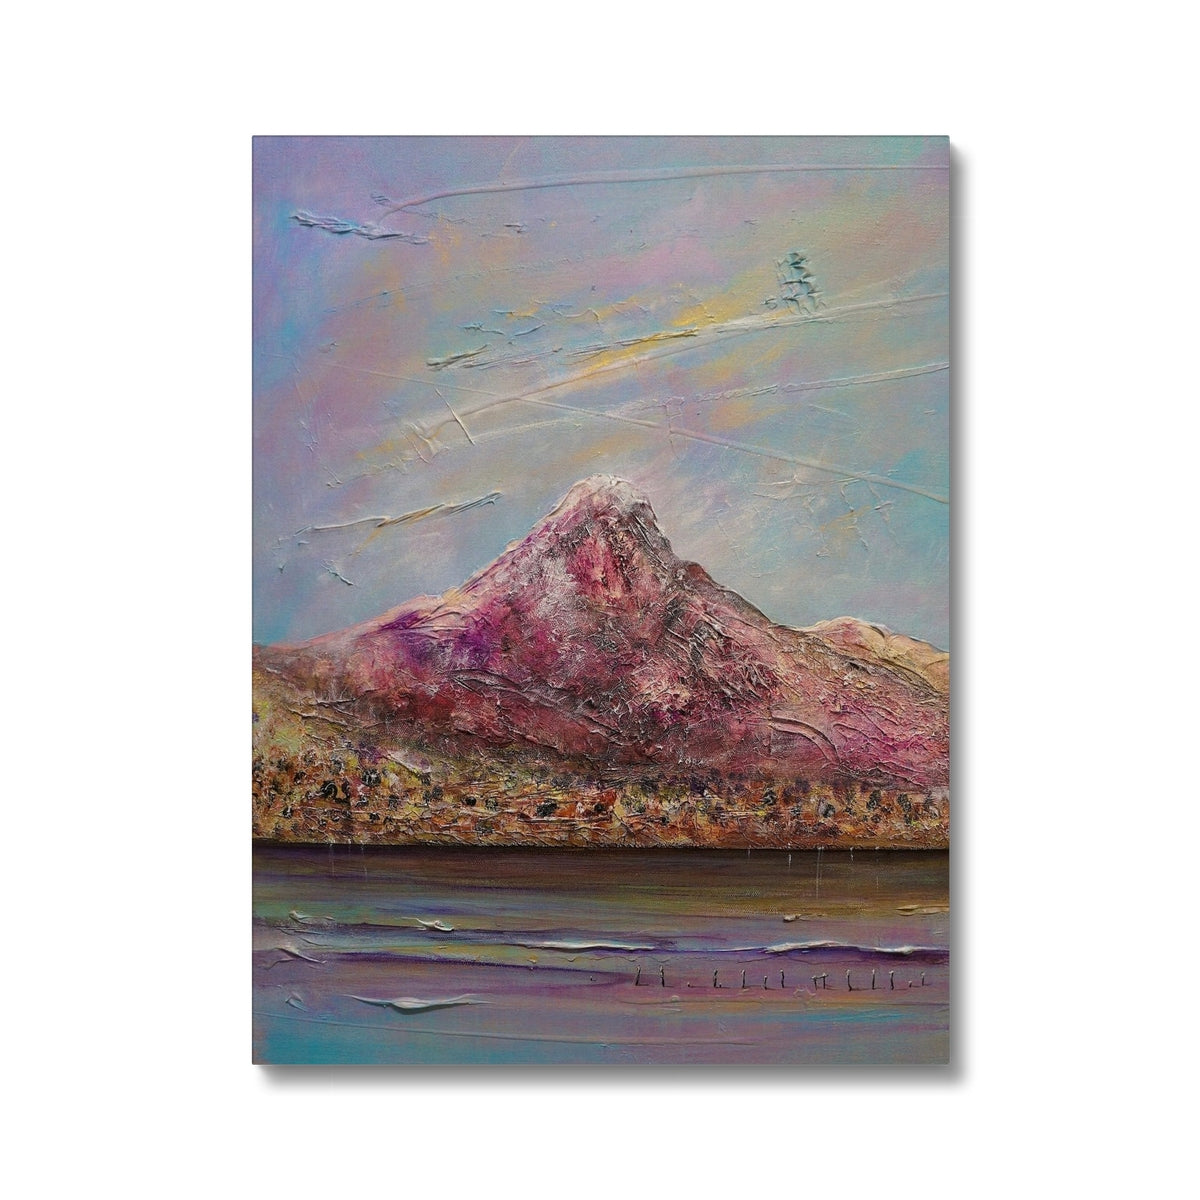 Ben Lomond Painting | Canvas From Scotland-Contemporary Stretched Canvas Prints-Scottish Lochs & Mountains Art Gallery-18"x24"-Paintings, Prints, Homeware, Art Gifts From Scotland By Scottish Artist Kevin Hunter